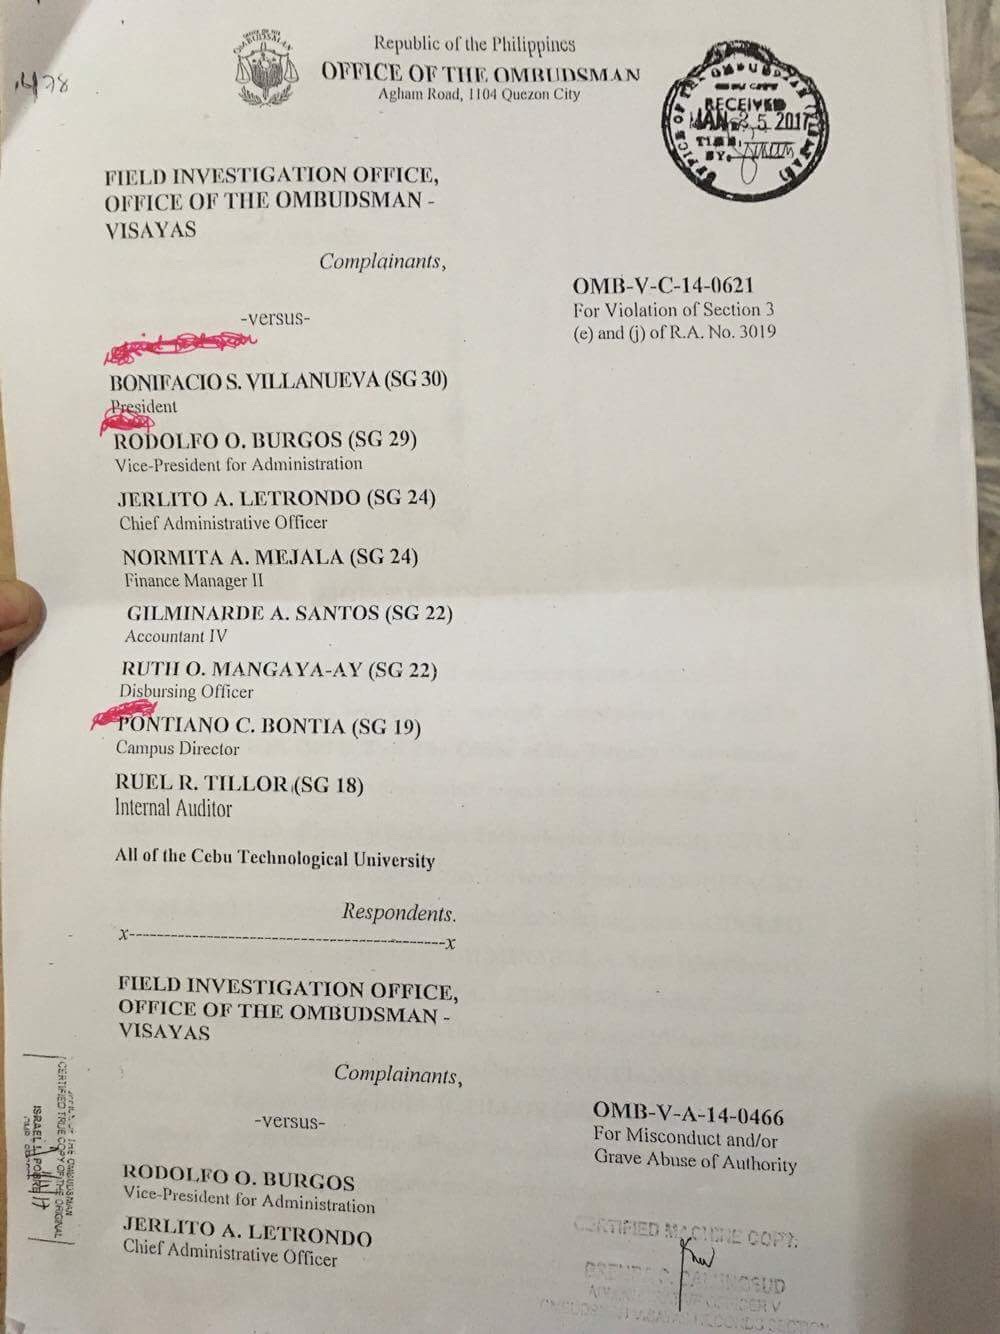 The dismissal order issued by the Office of the Ombudsman. (CDN PHOTO/IZOBELLE T. PULGO)